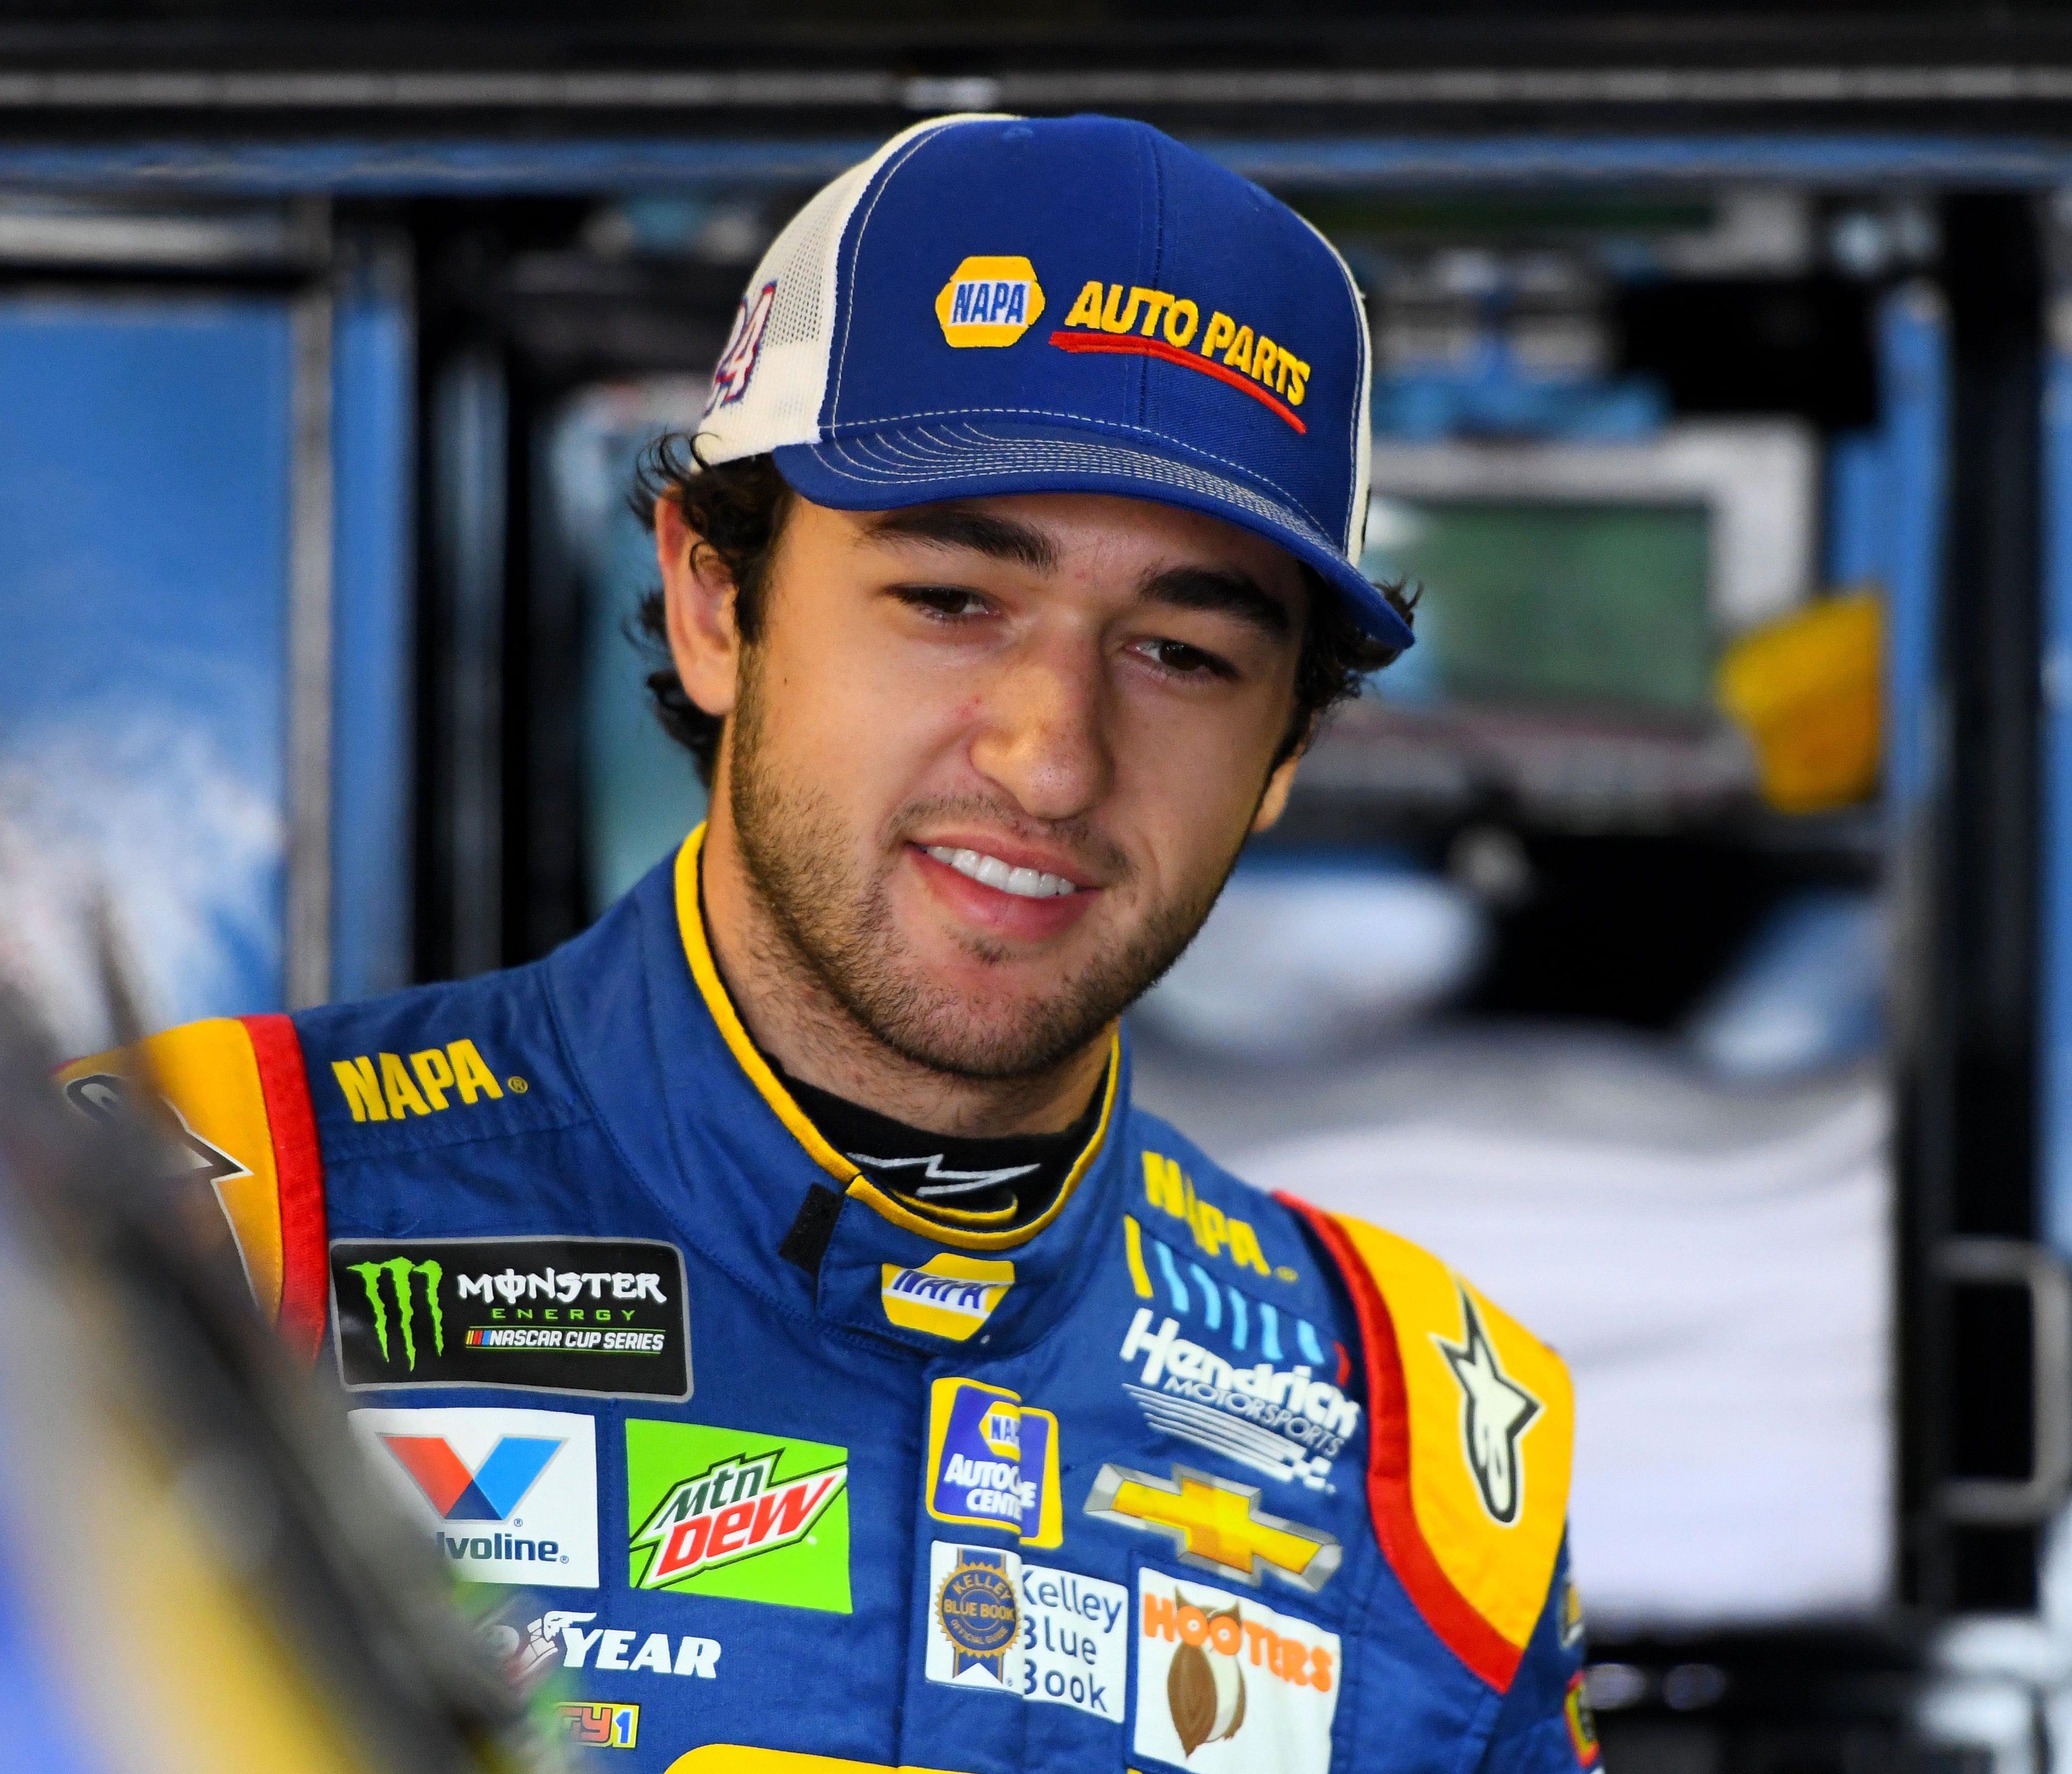 Jun 16, 2017; Brooklyn, MI, USA;  NASCAR Cup Series driver Chase Elliott (24) during practice for the FireKeepers Casino 400 at Michigan International Speedway. Mandatory Credit: Mike DiNovo-USA TODAY Sports ORG XMIT: USATSI-360416 ORIG FILE ID:  201